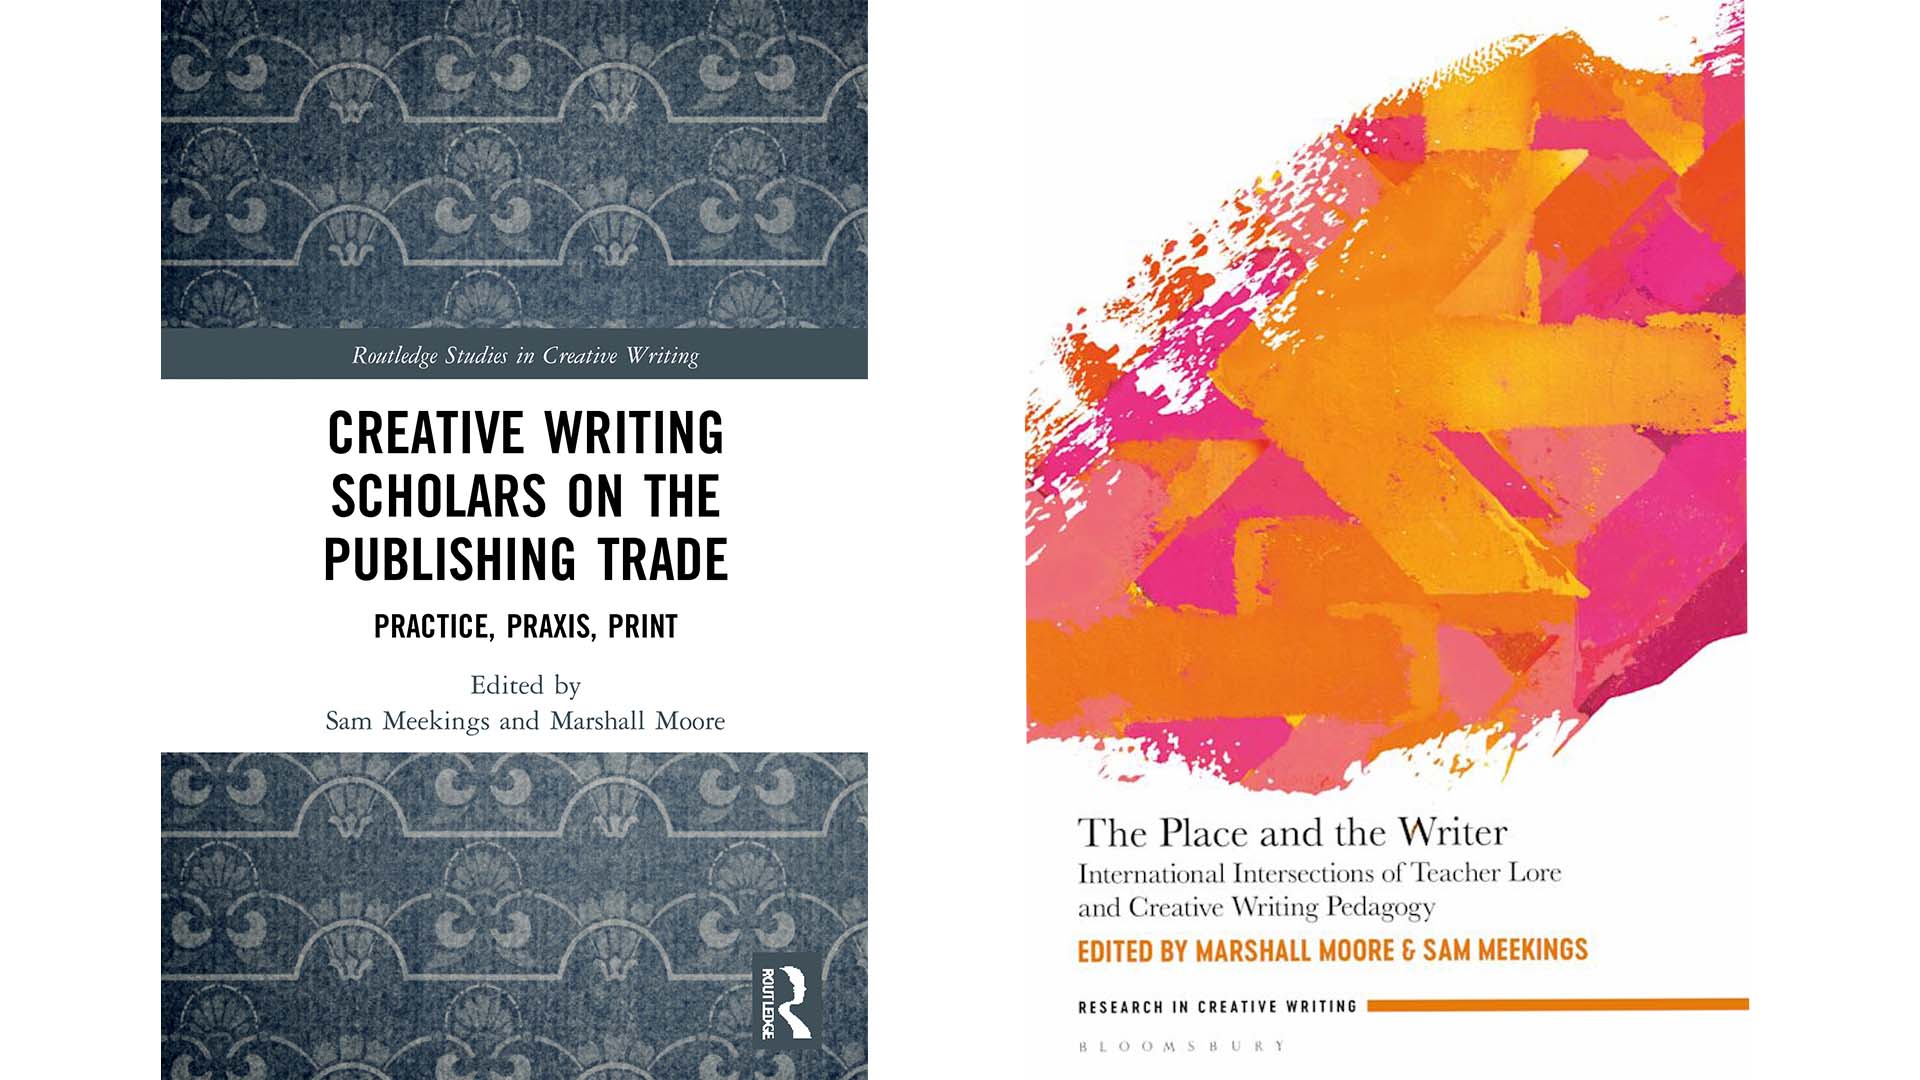 A book on creative writing teaching practices and one on publishing in the digital age by Professor Sam Meekings have just been published